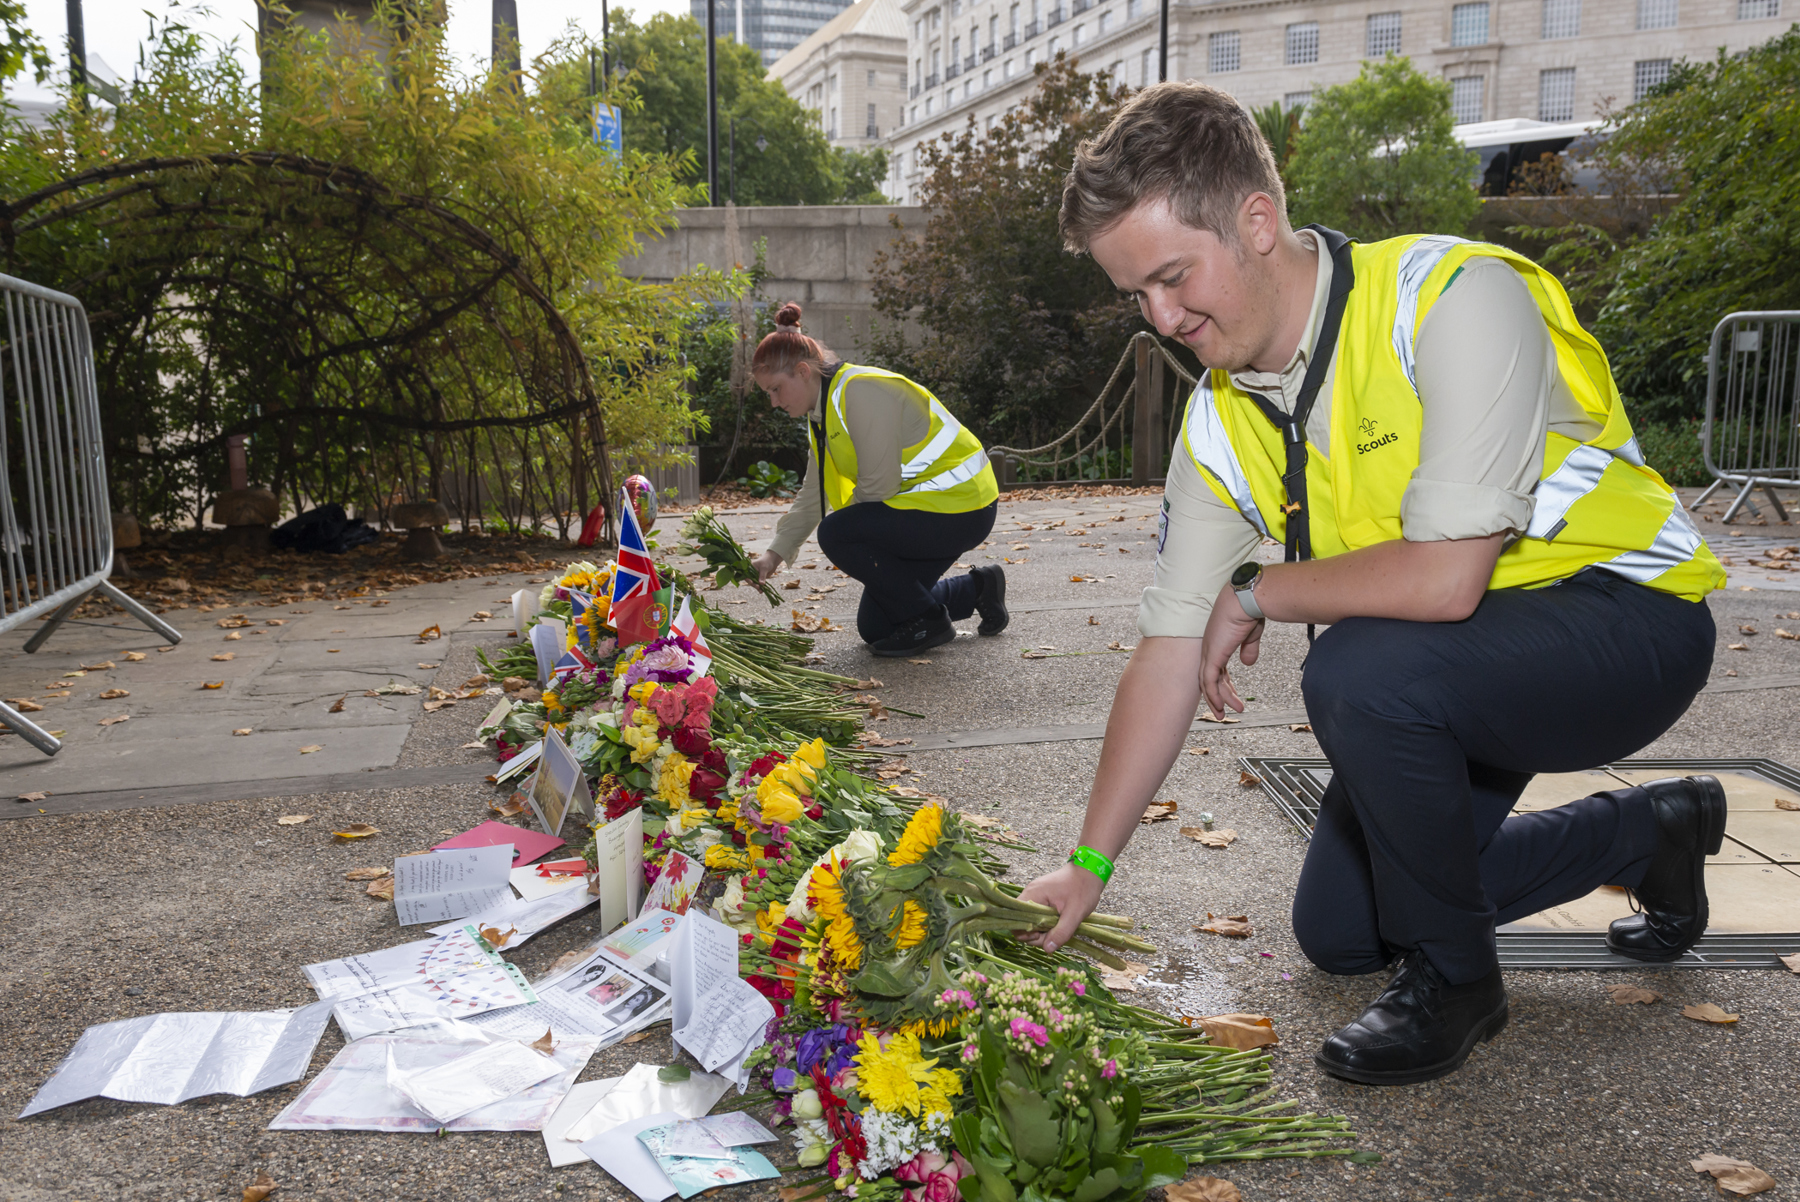 Two Scouts volunteers in hi-vis jackets are laying out flowers and cards in a row on the ground